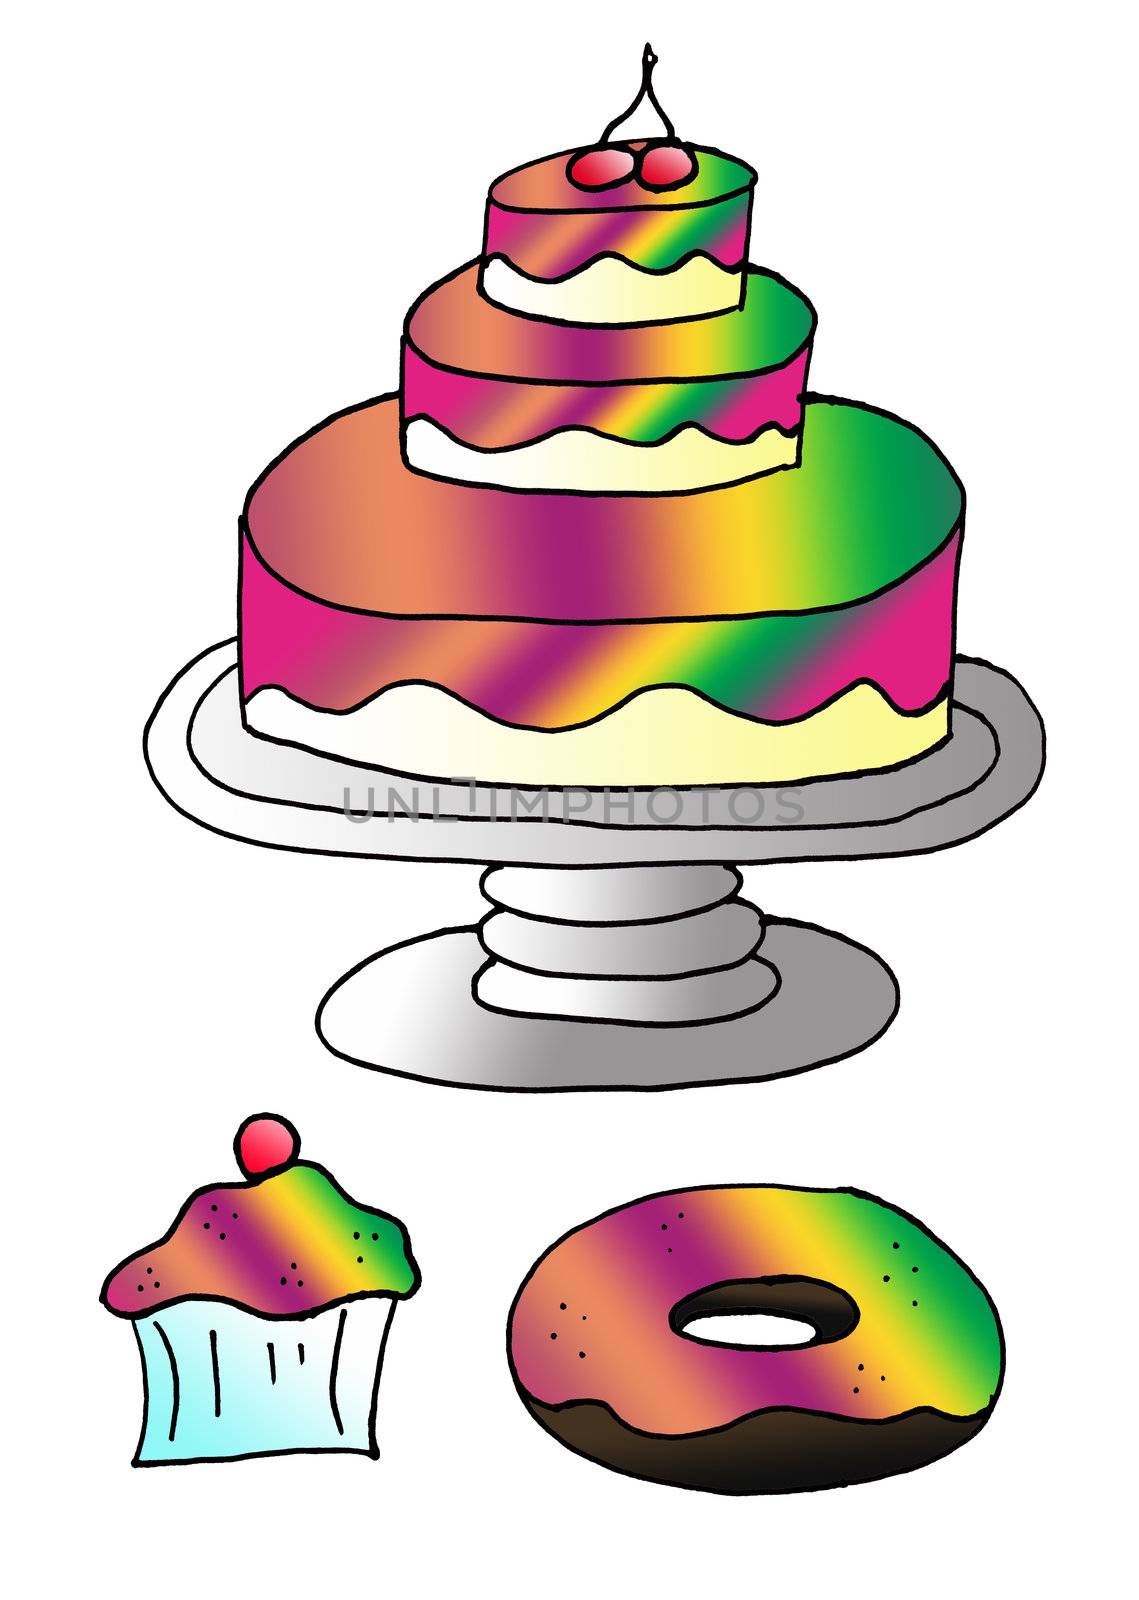 An illustration of a cupcake, a cake, and a donut made for colorful clip art with a white background.